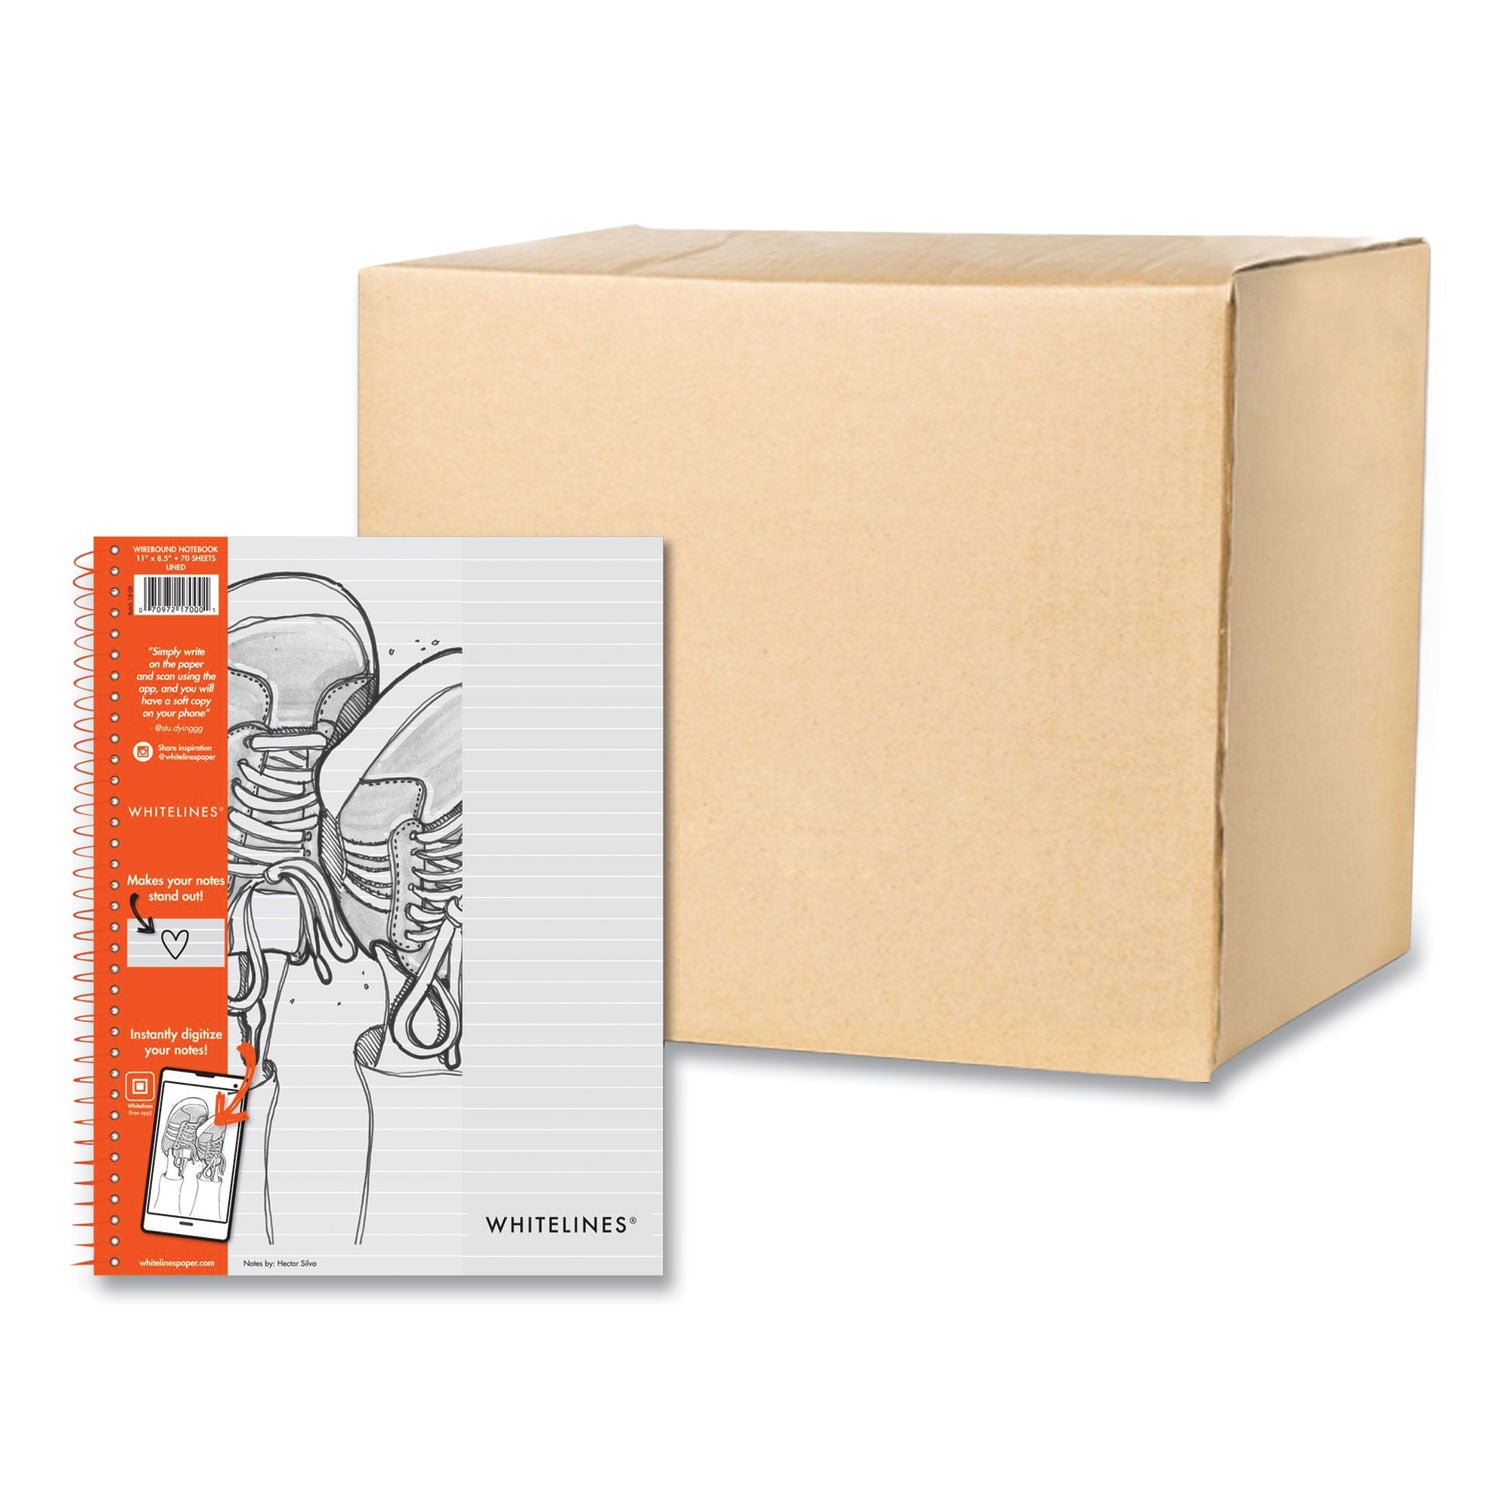 whitelines-notebook-medium-college-rule-gray-orange-cover-70-85-x-11-sheets-12-carton-ships-in-4-6-business-days_roa17000cs - 1